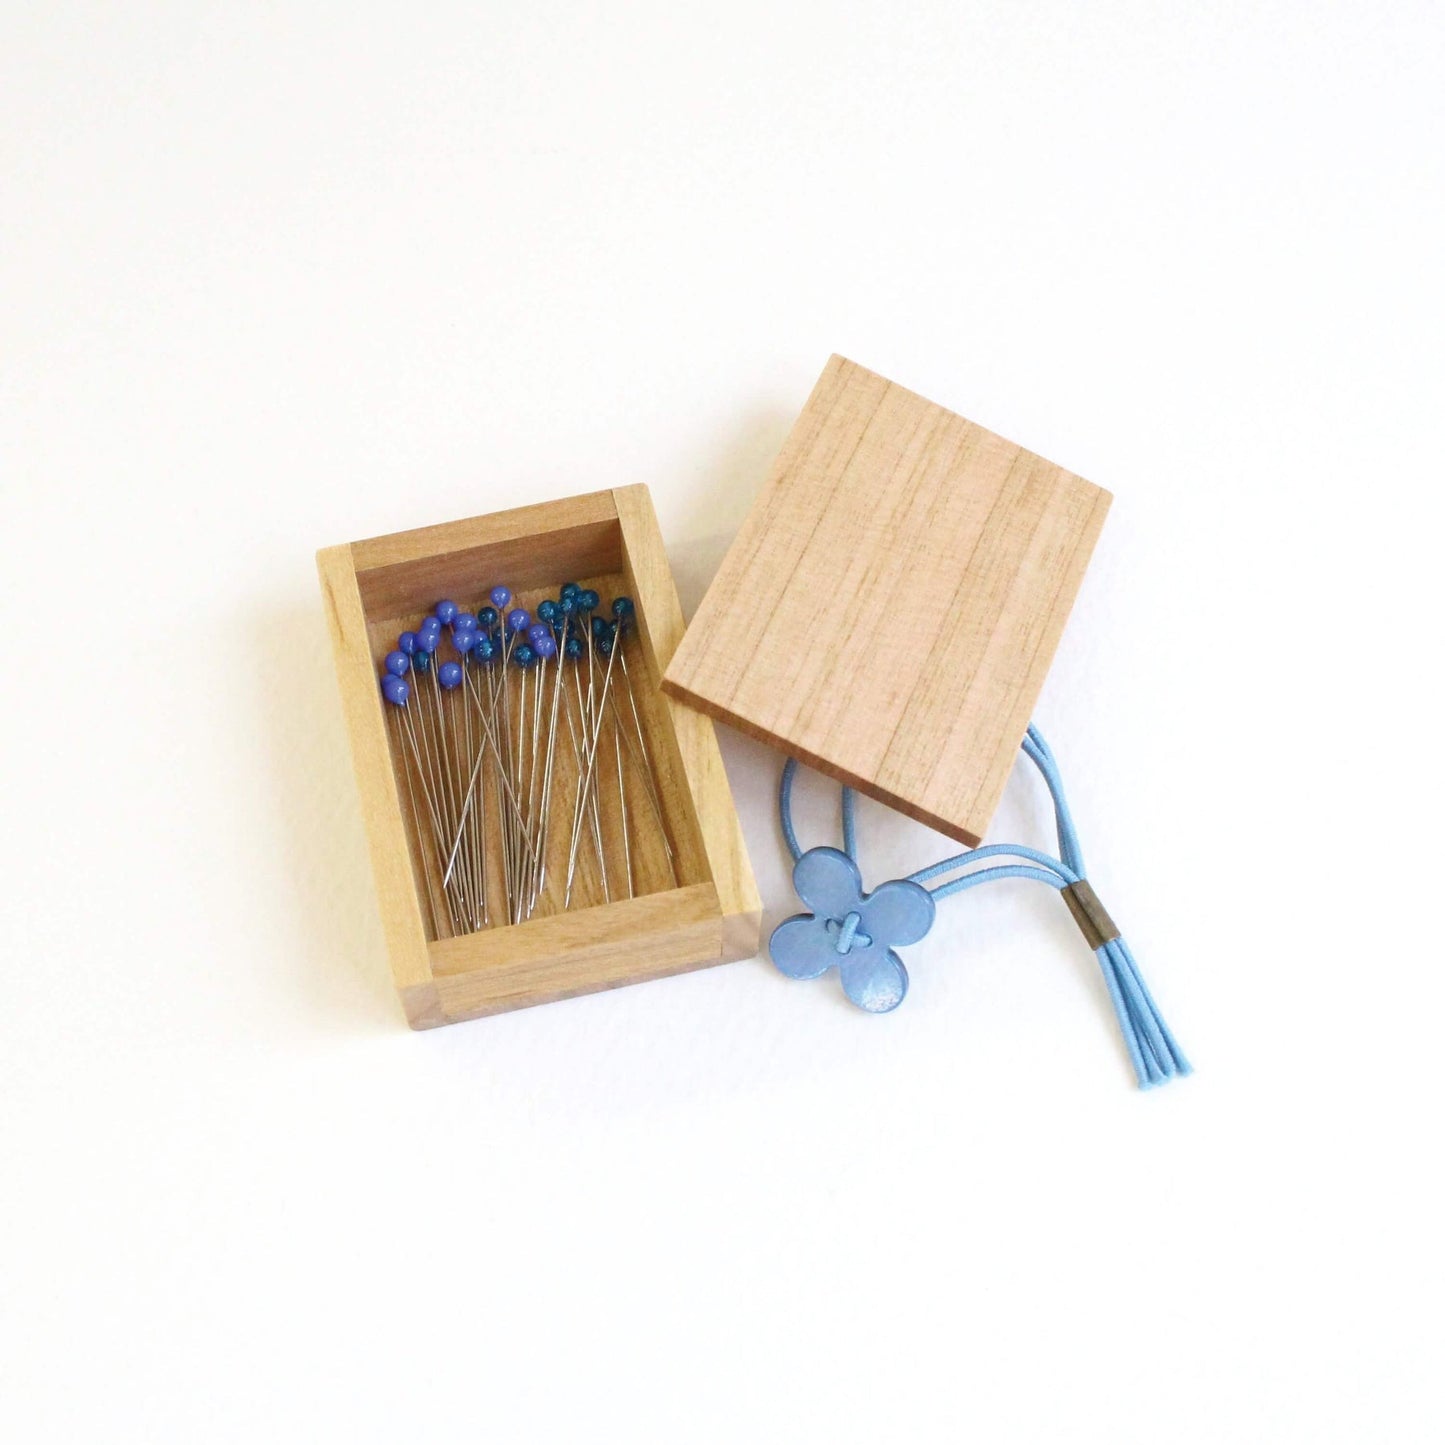 Open wooden box of blue glass headed pins by cohana